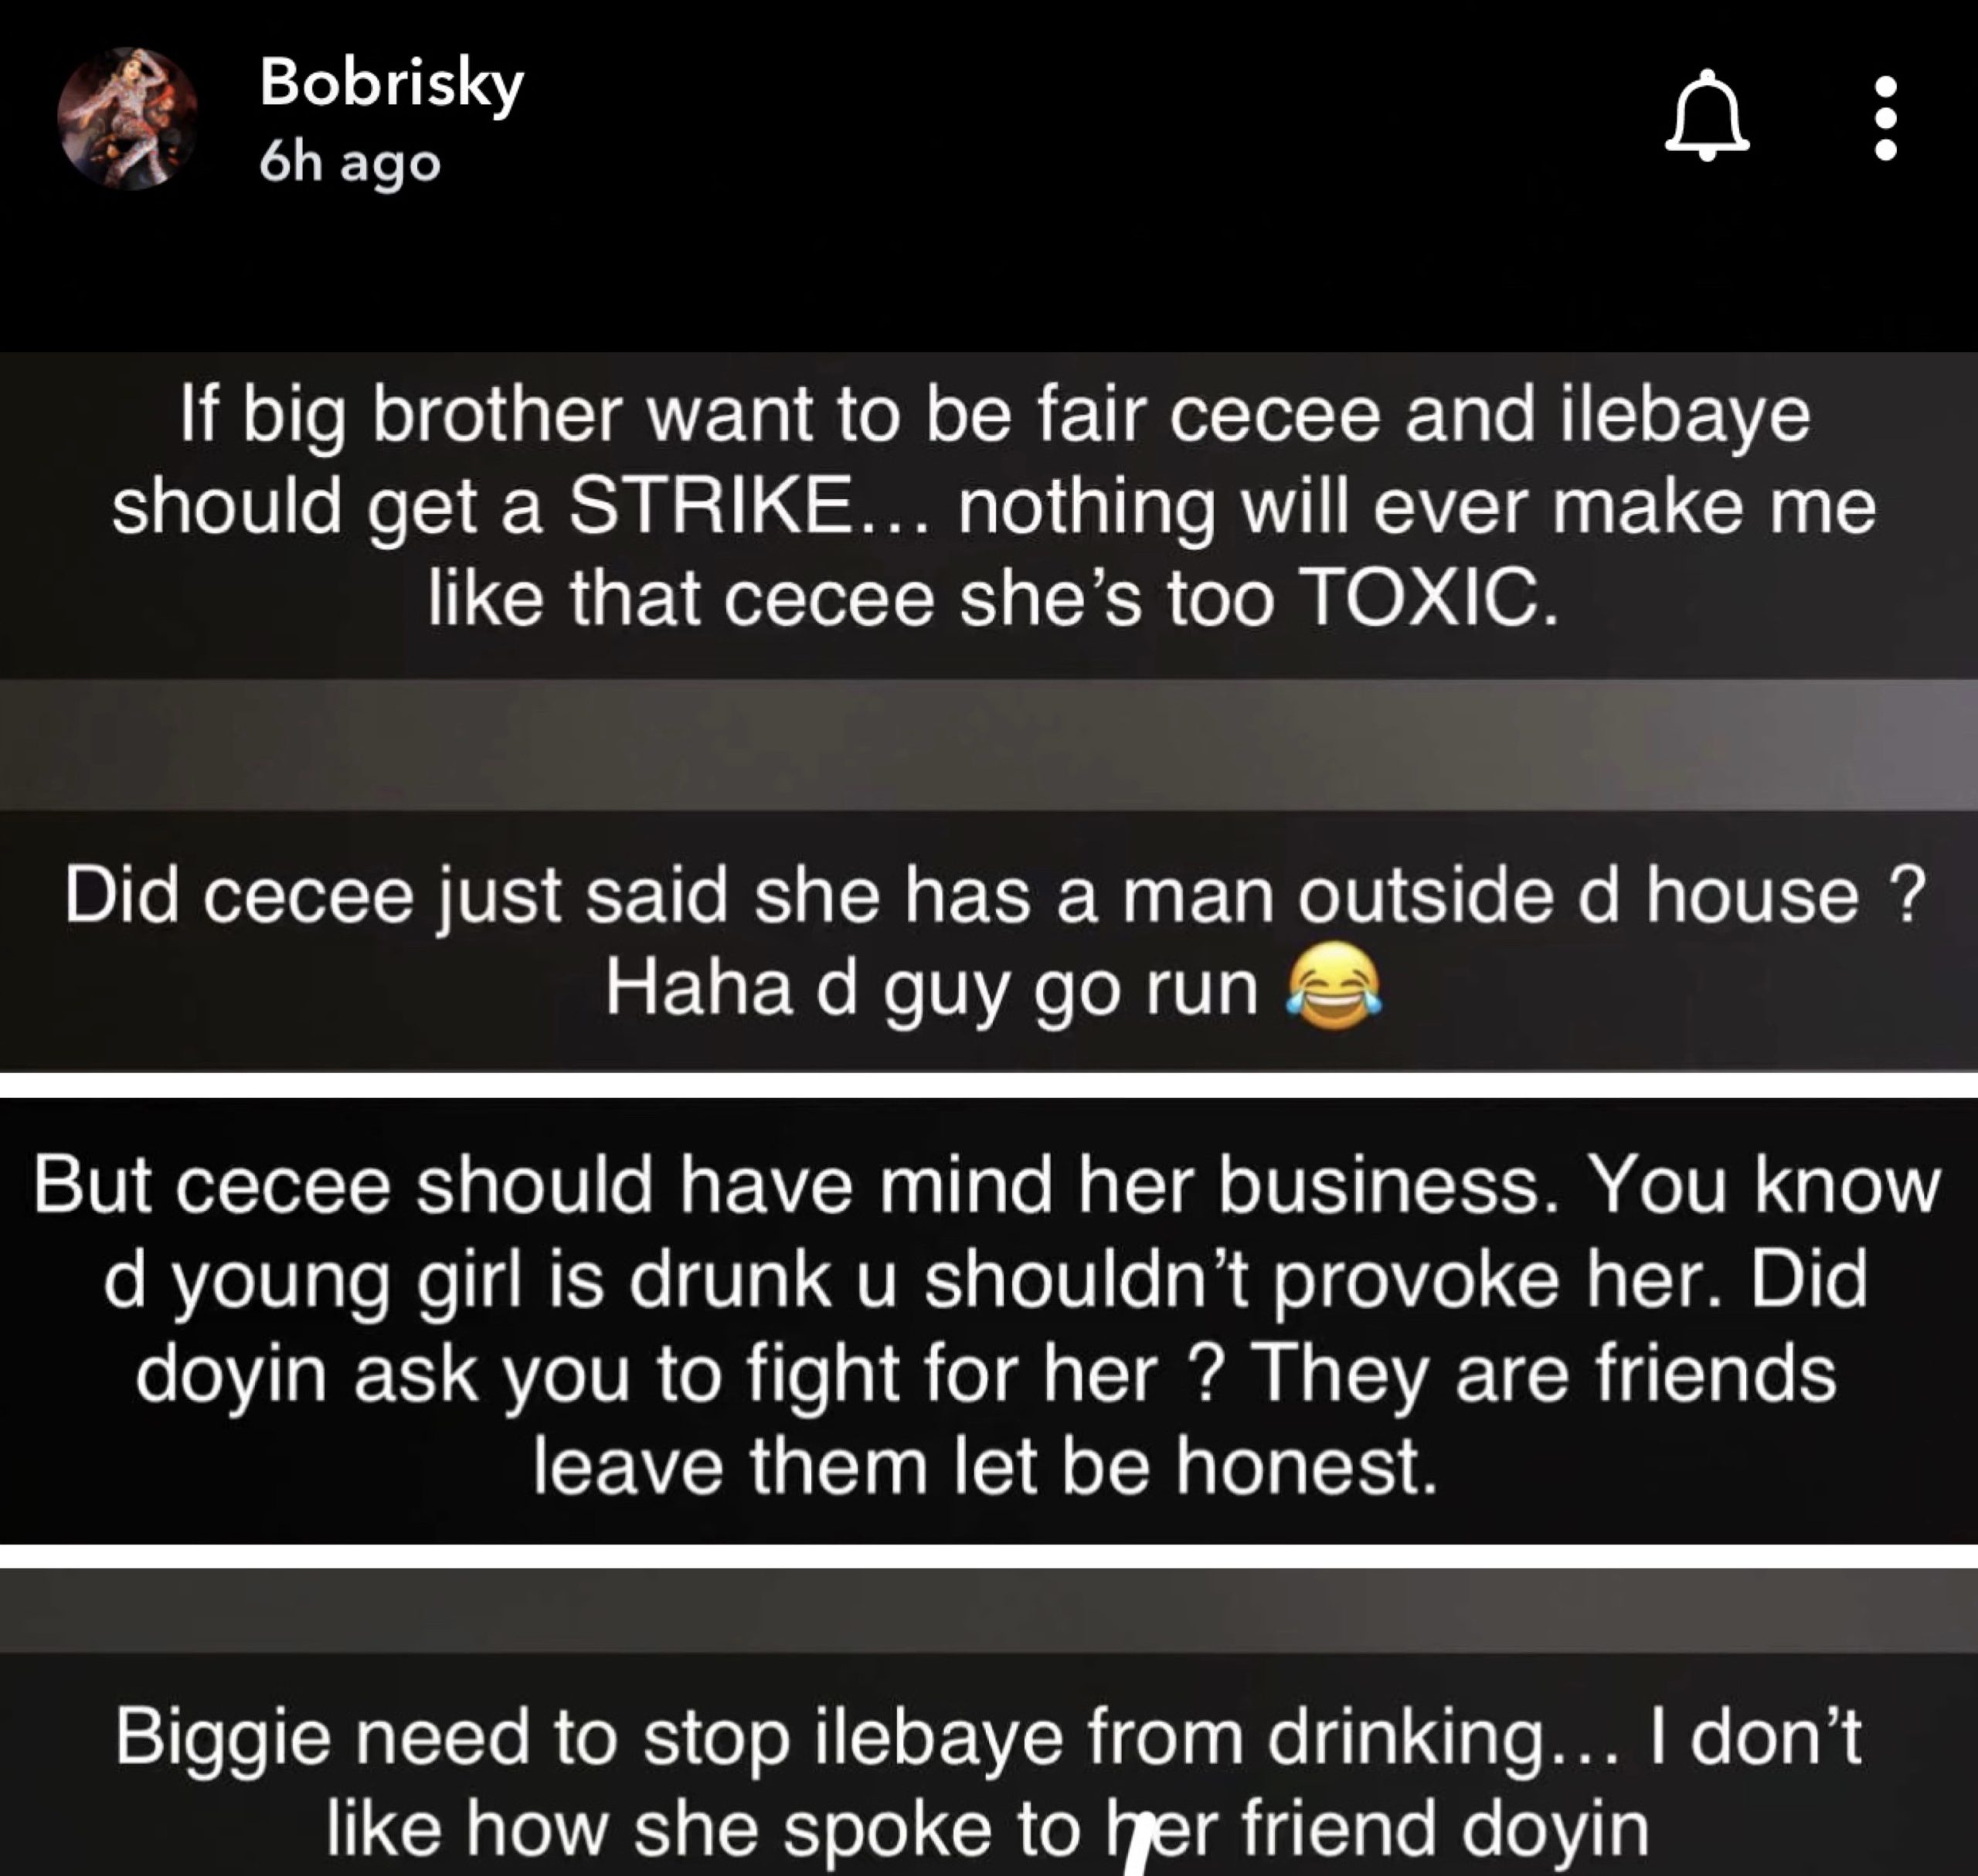 Ceec is toxic. Nothing will make me like her - Bobrisky says